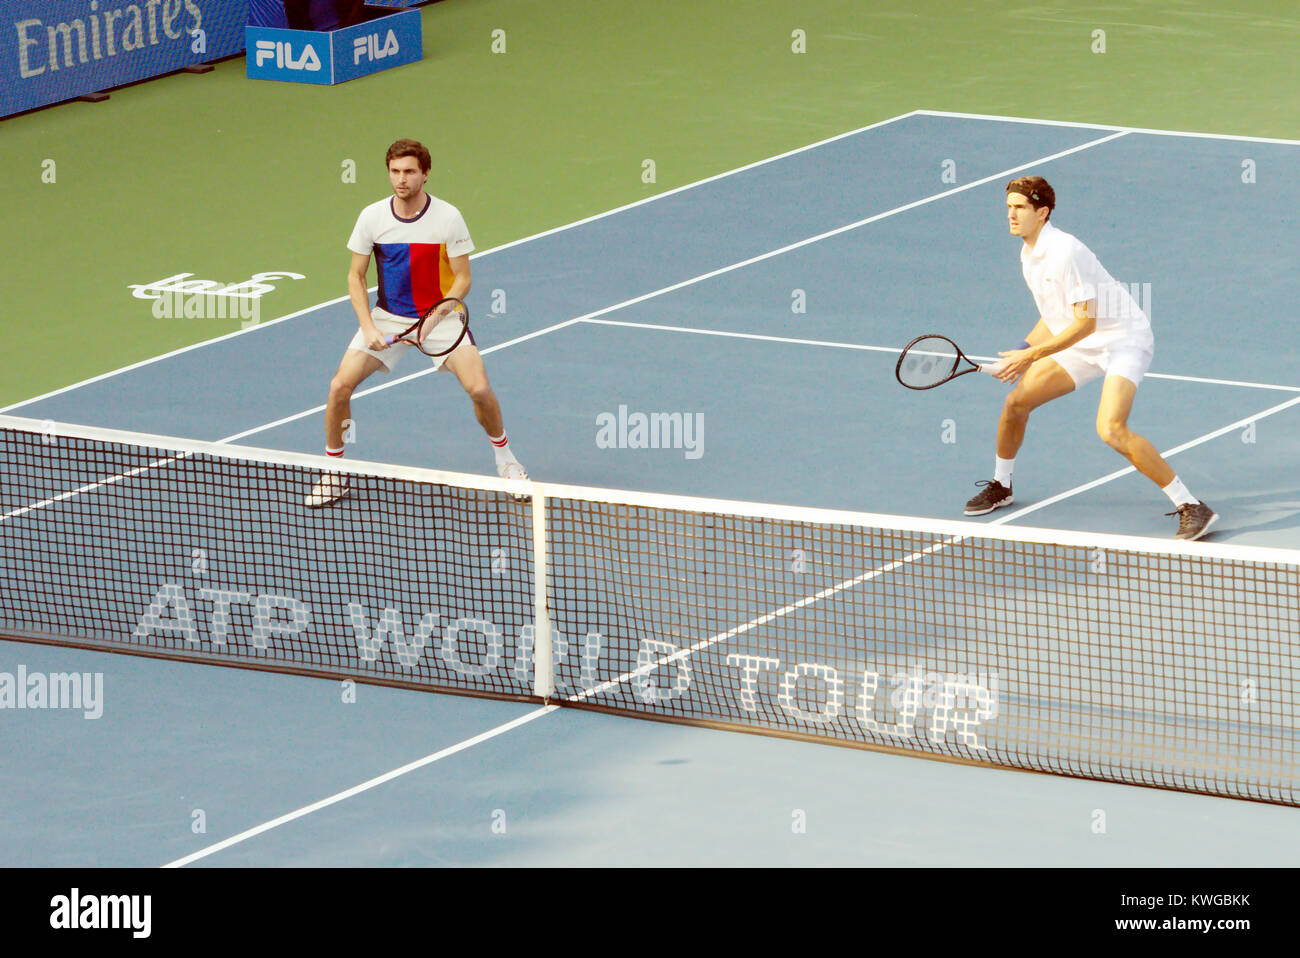 Pune, India. 2nd Jan, 2018. Gilles Simon and Pierre-Hugues Herbert of France in action in the first round of Doubles competition at Tata Open Maharashtra at the Mahalunge Balewadi Tennis Stadium in Pune, India. Credit: Karunesh Johri/Alamy Live News Stock Photo